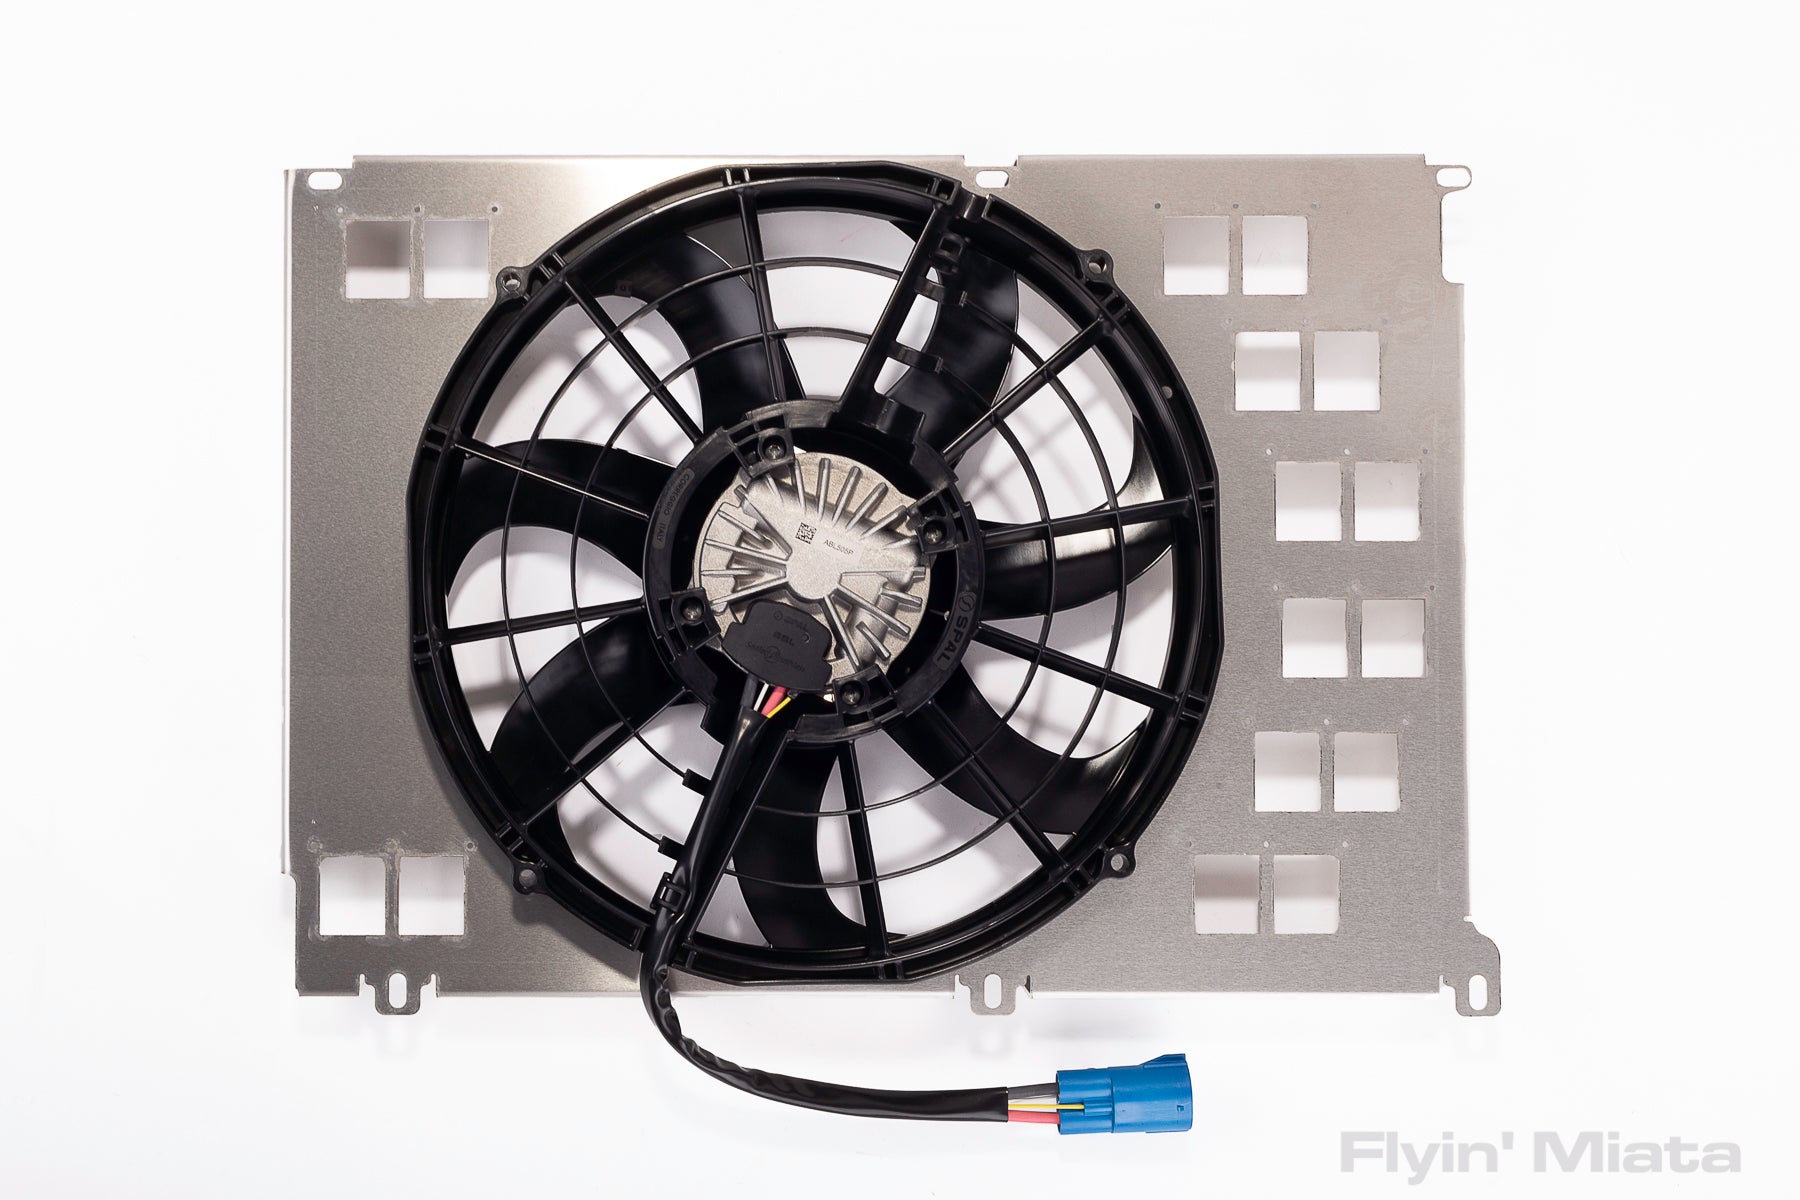 impatient Involved Array of Get yourself brushless fan technology at a lower price! – Flyin' Miata